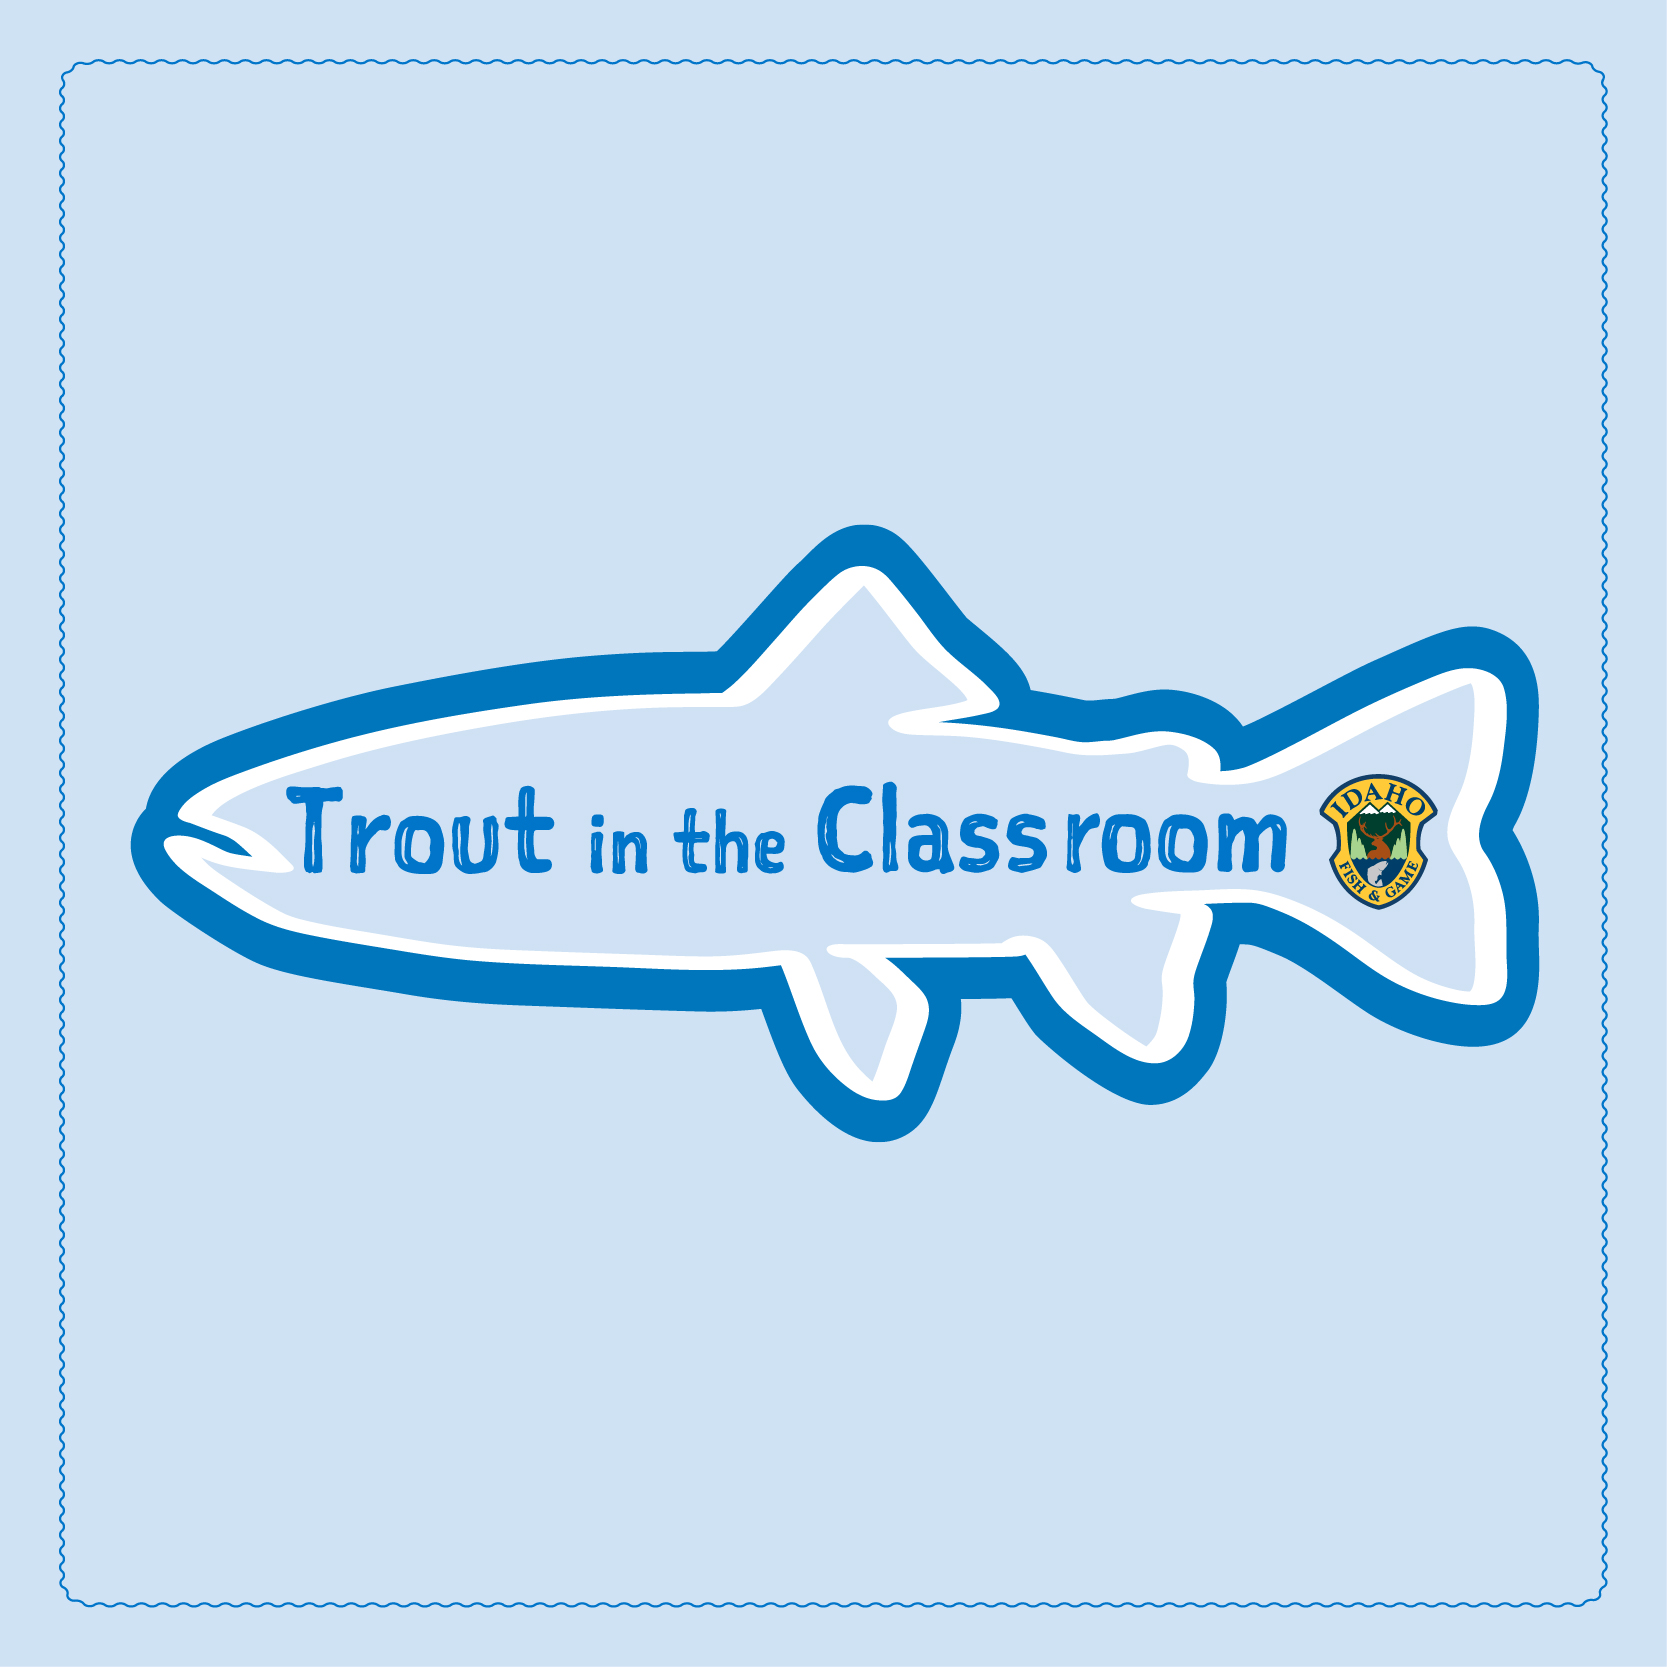 Trout in the Classroom  Idaho State University